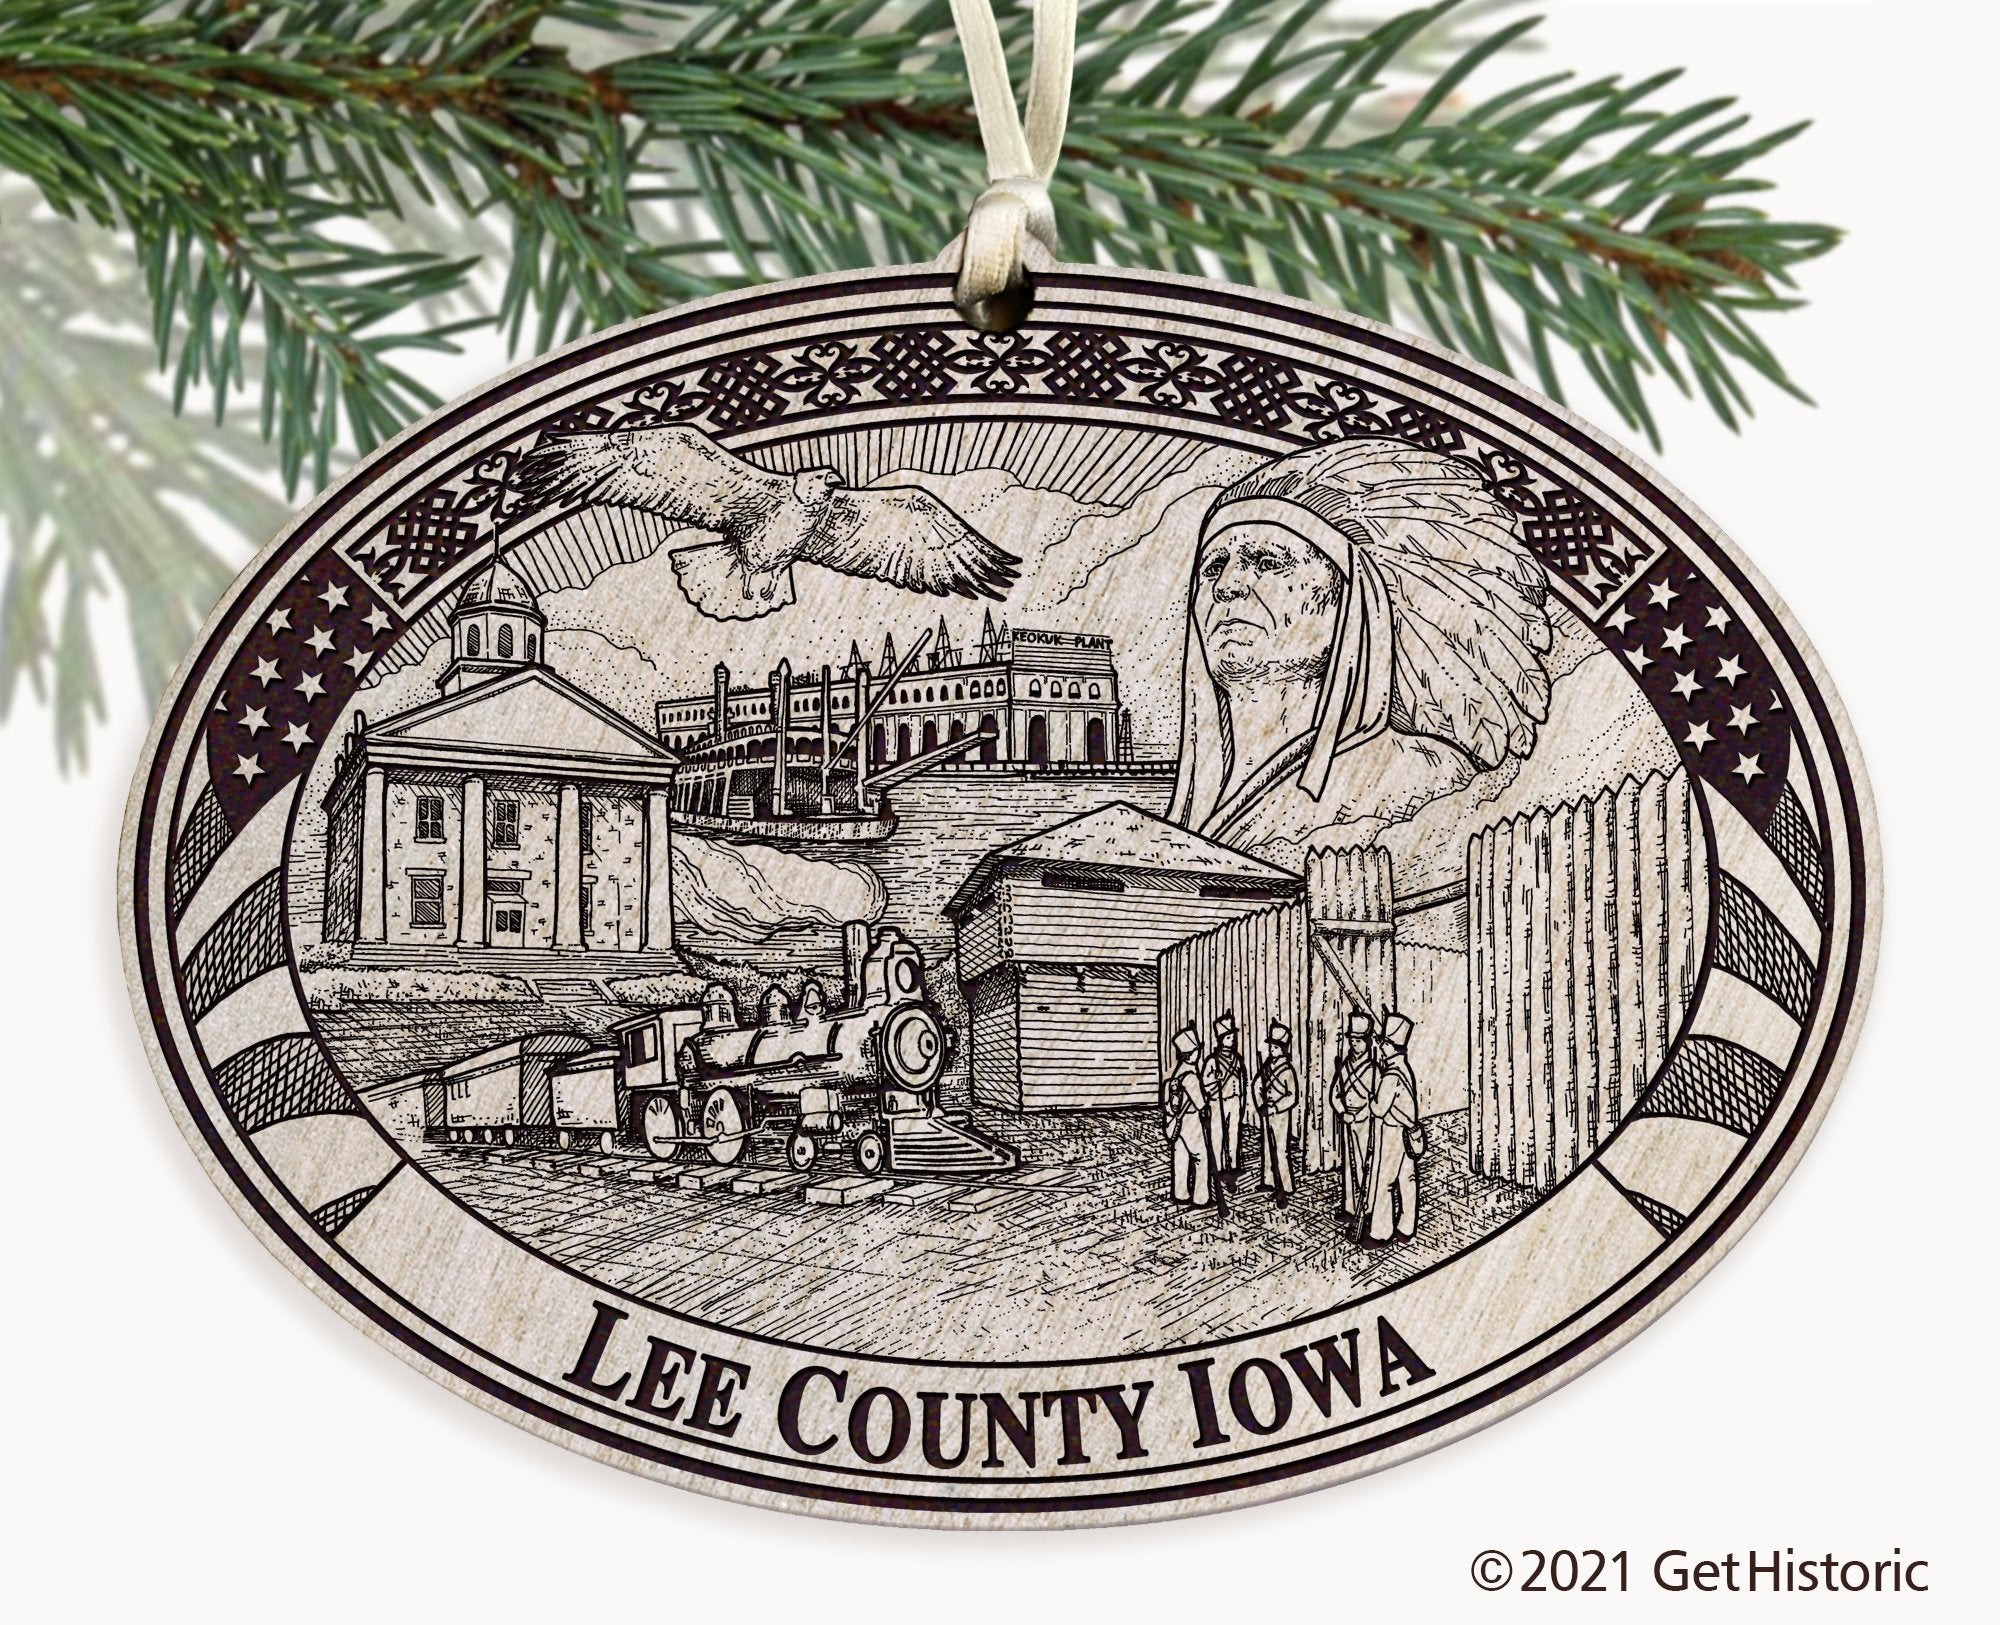 Lee County Iowa Engraved Ornament